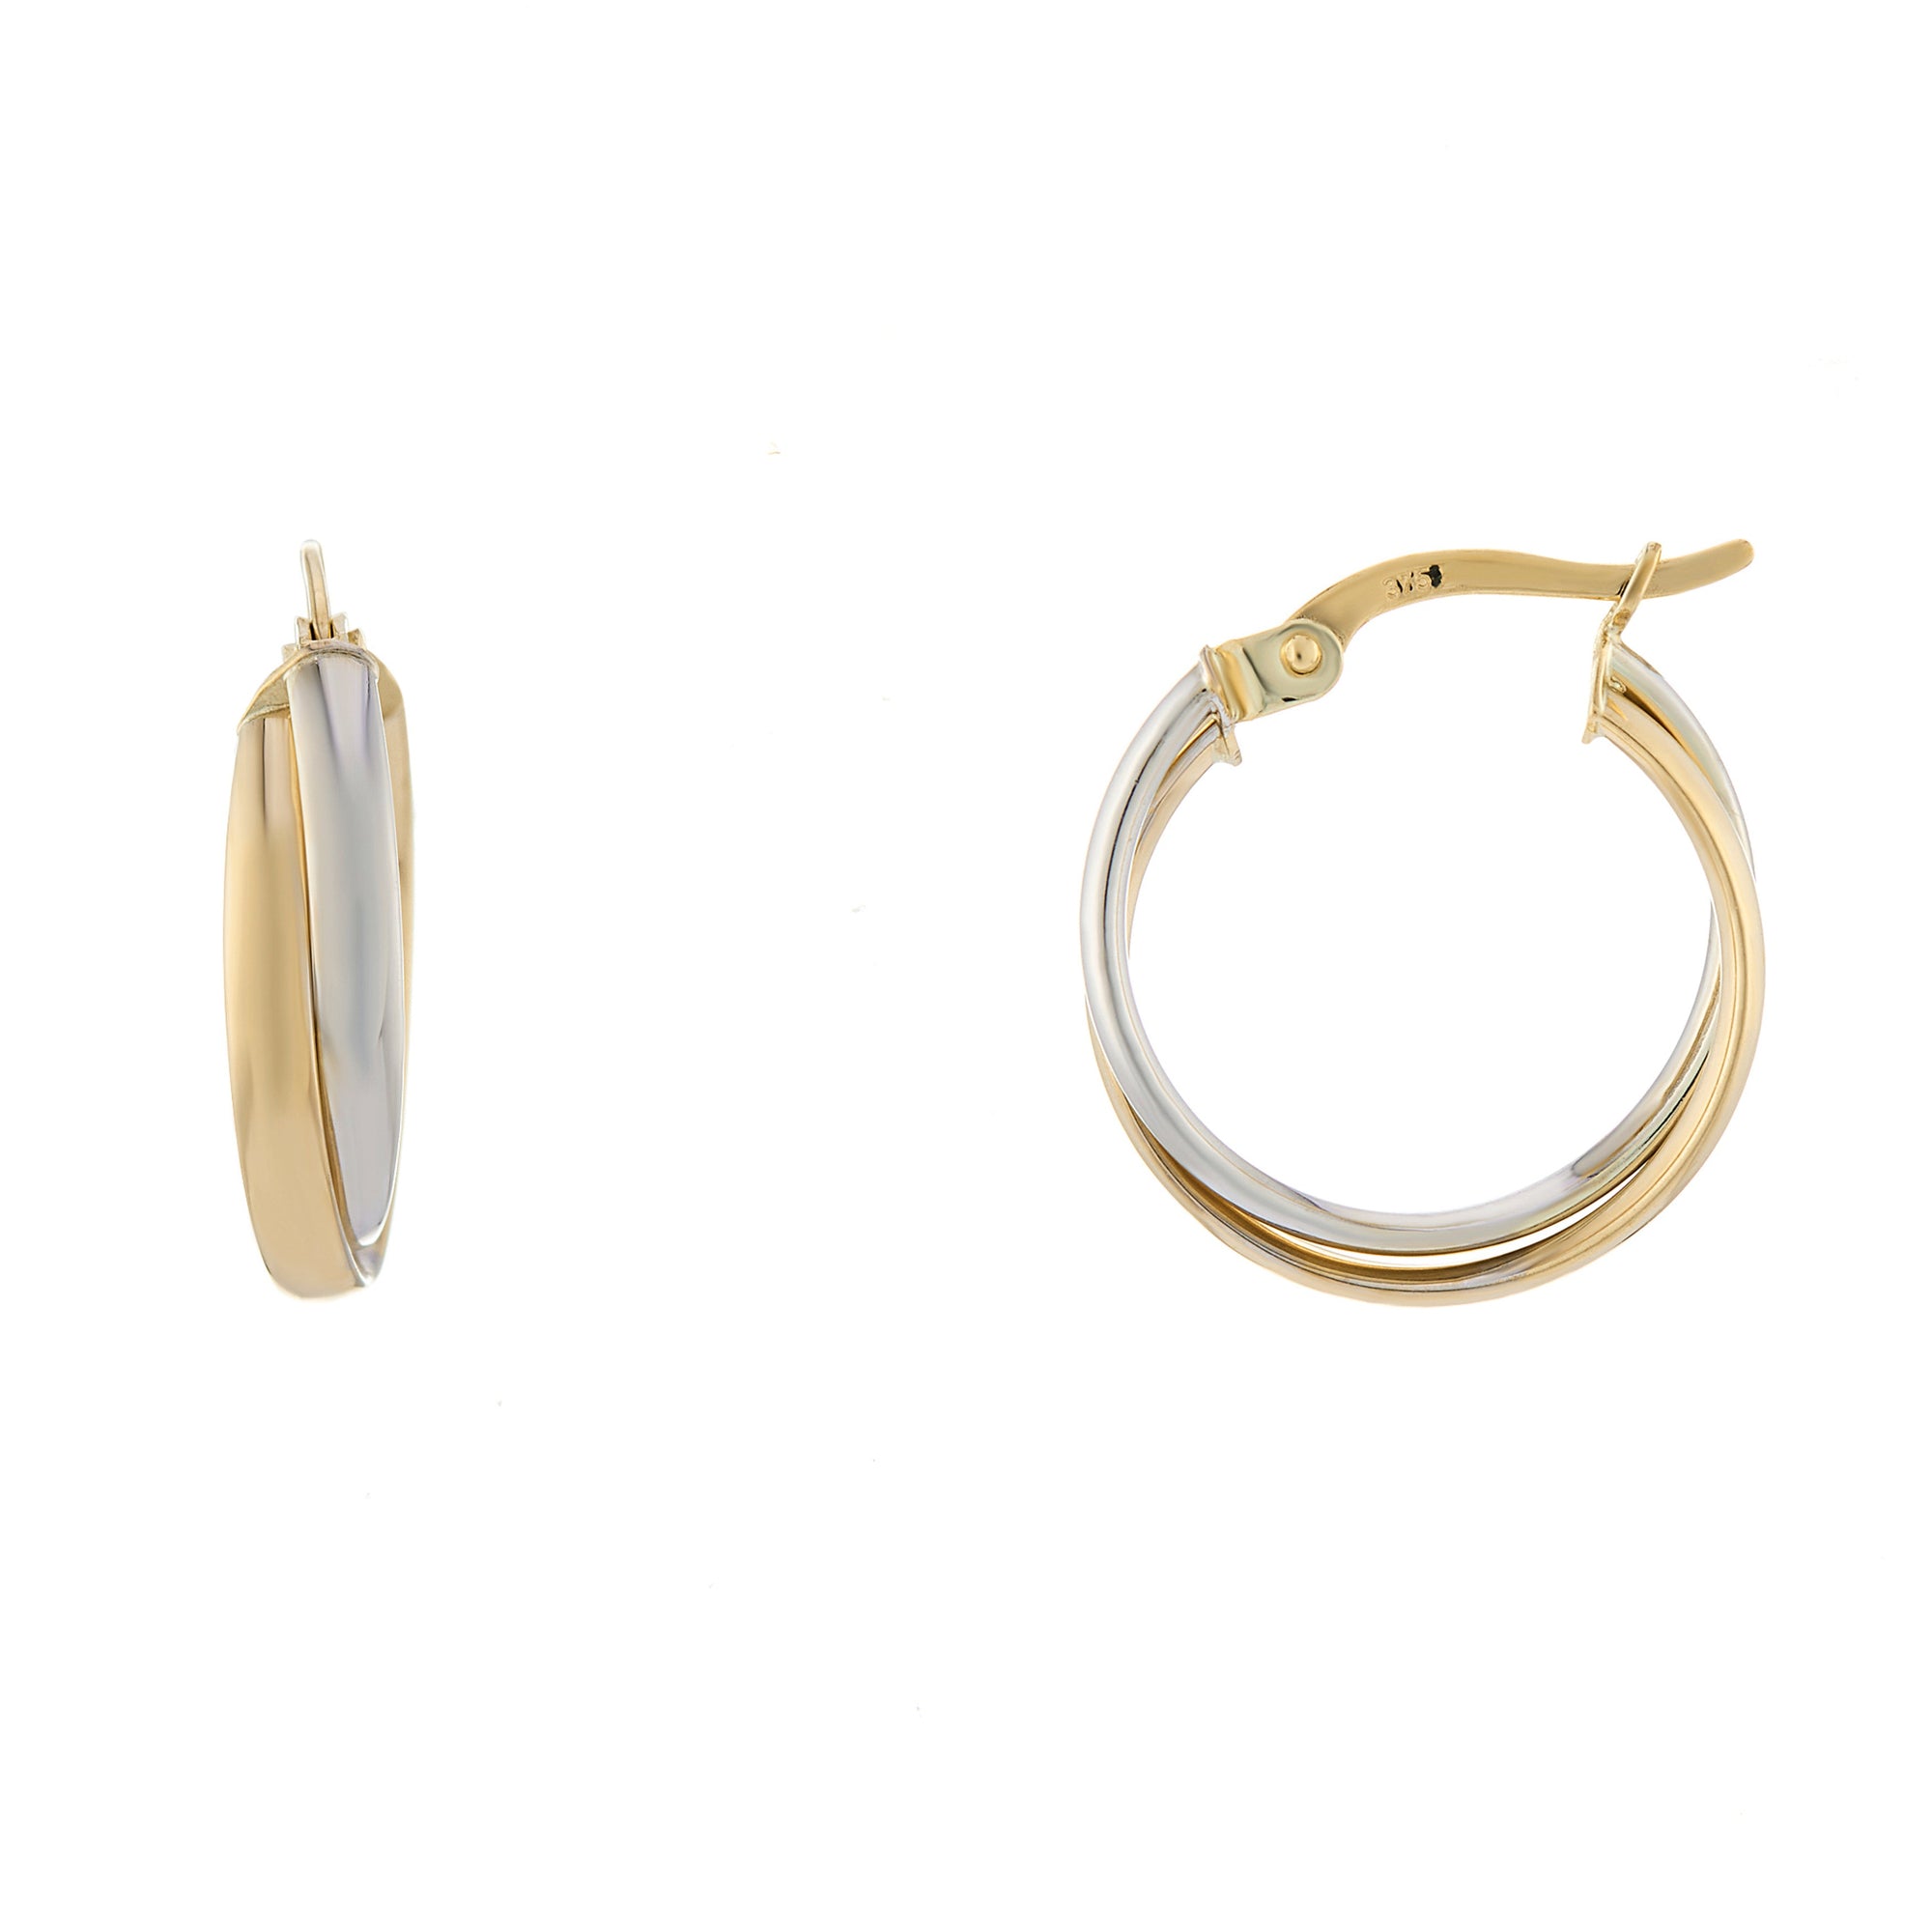 9ct two colour gold 15mm hoop earrings